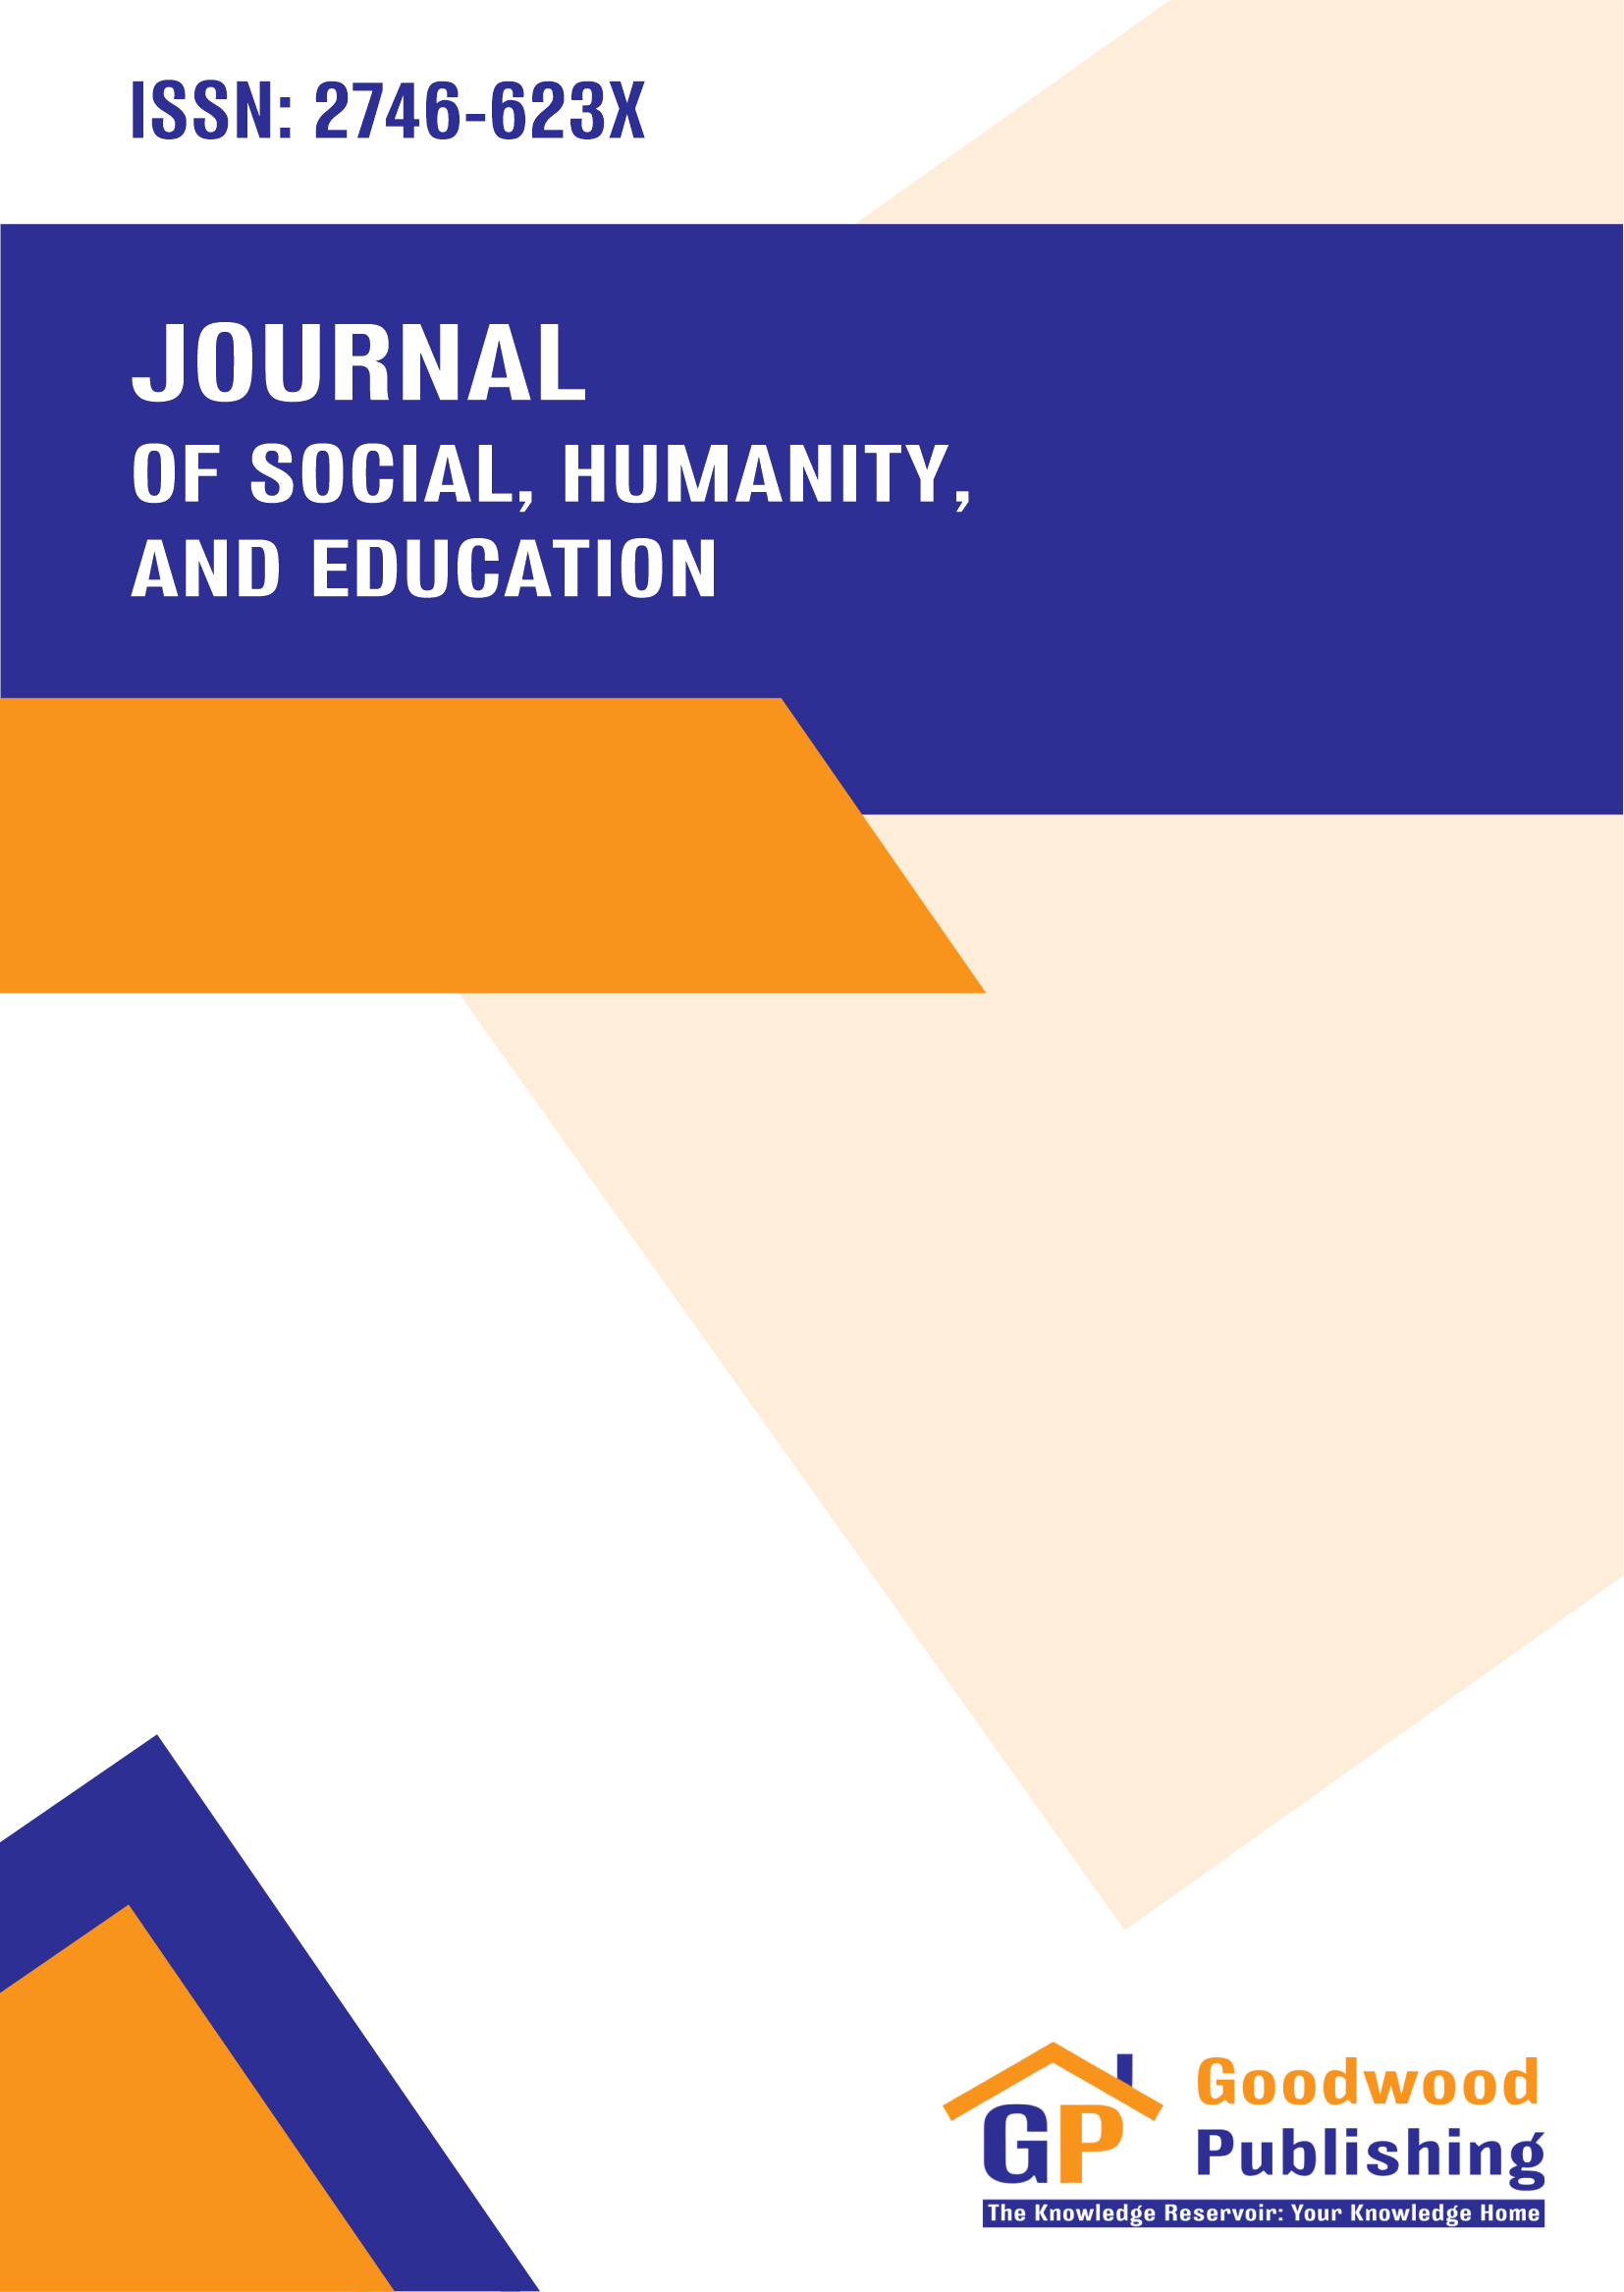 Journal of Social, Humanity, and Education